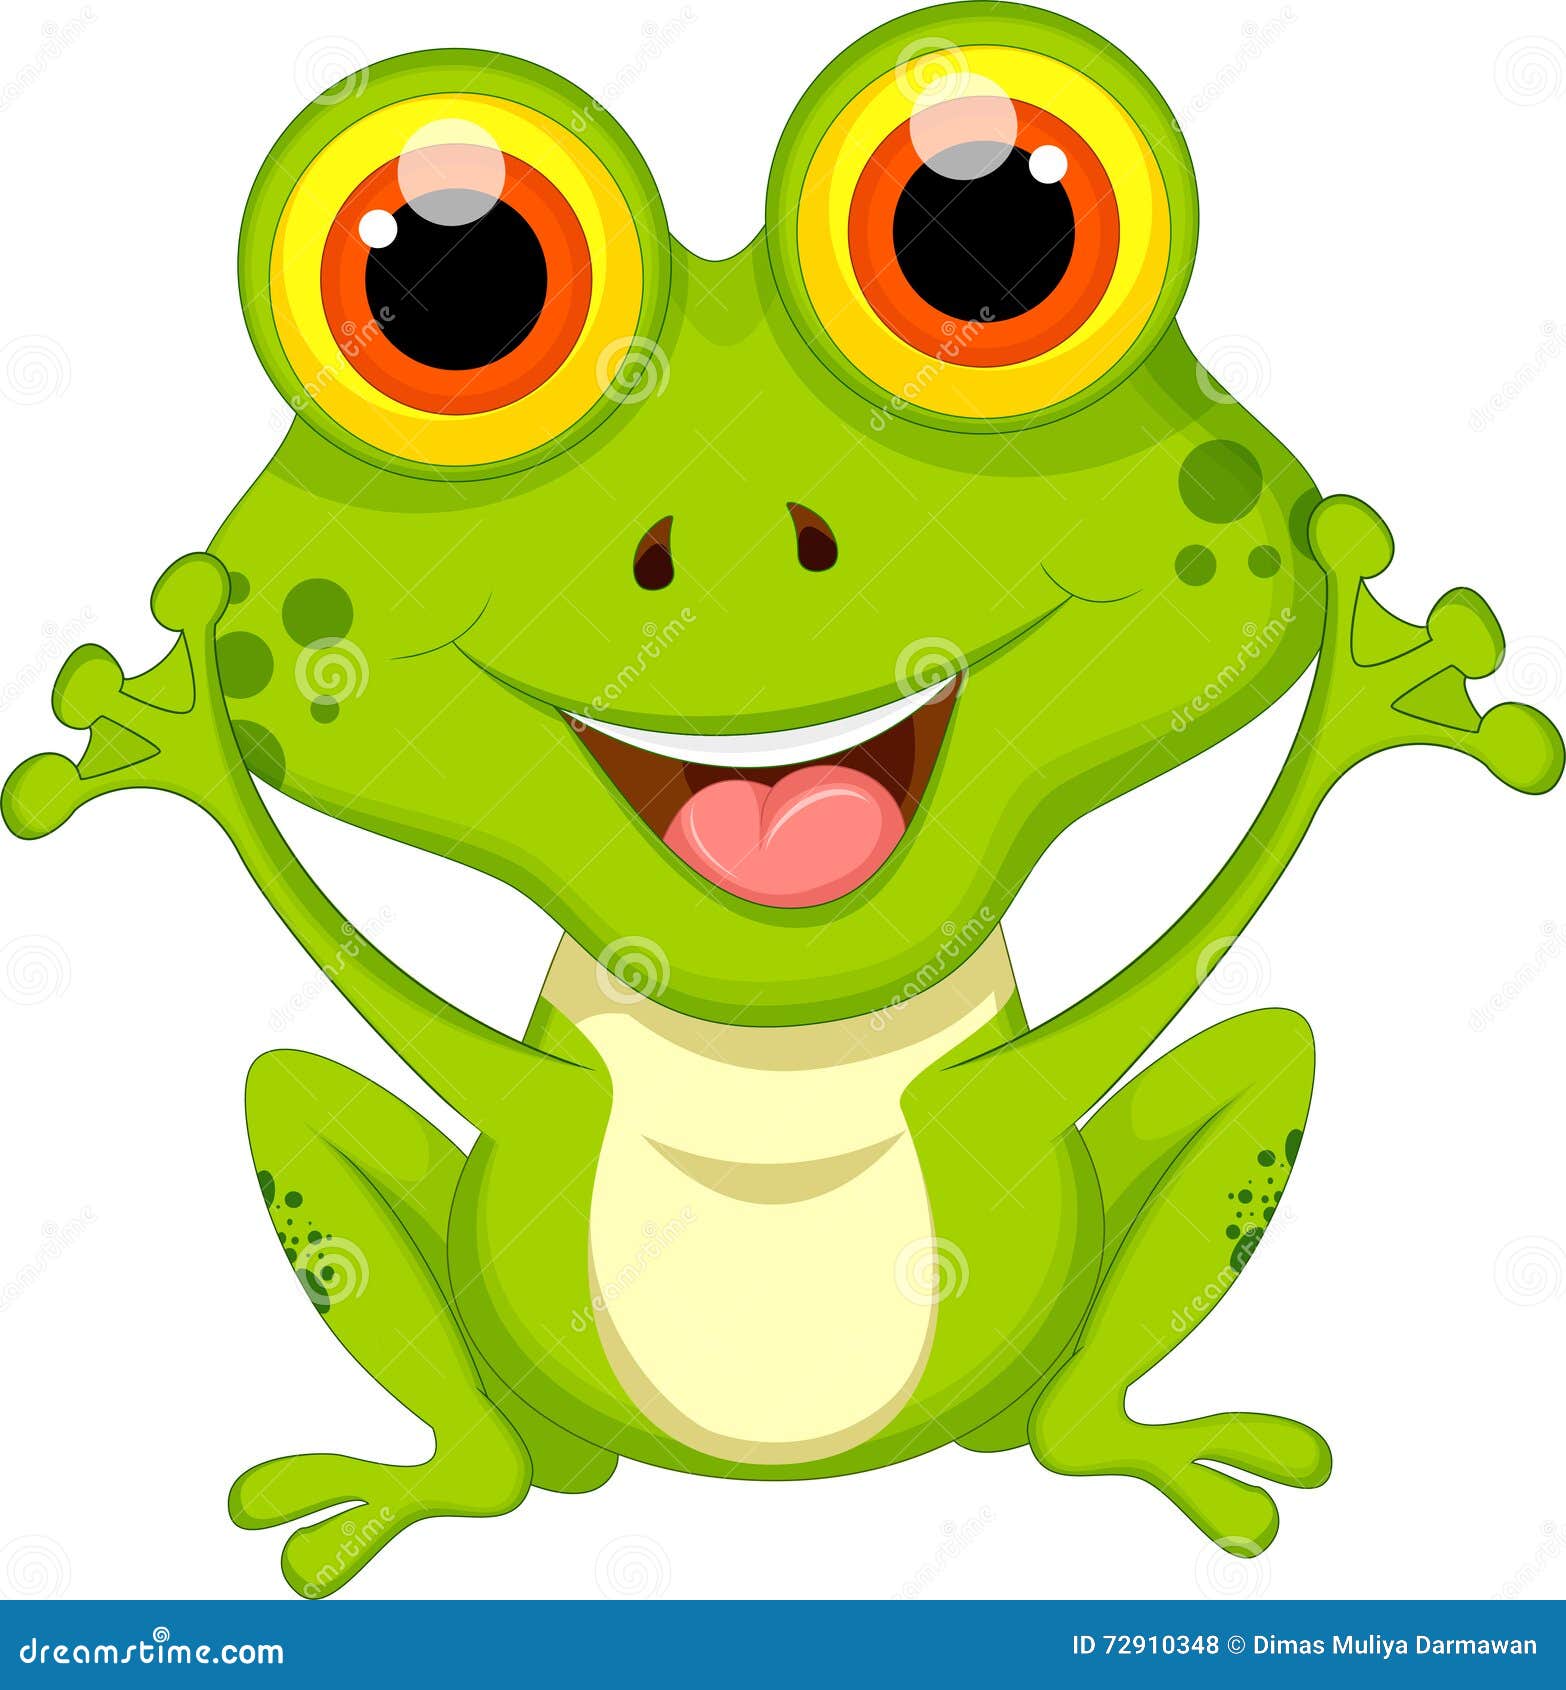 Cute Frog Cartoon Sitting for You Design Stock Illustration ...